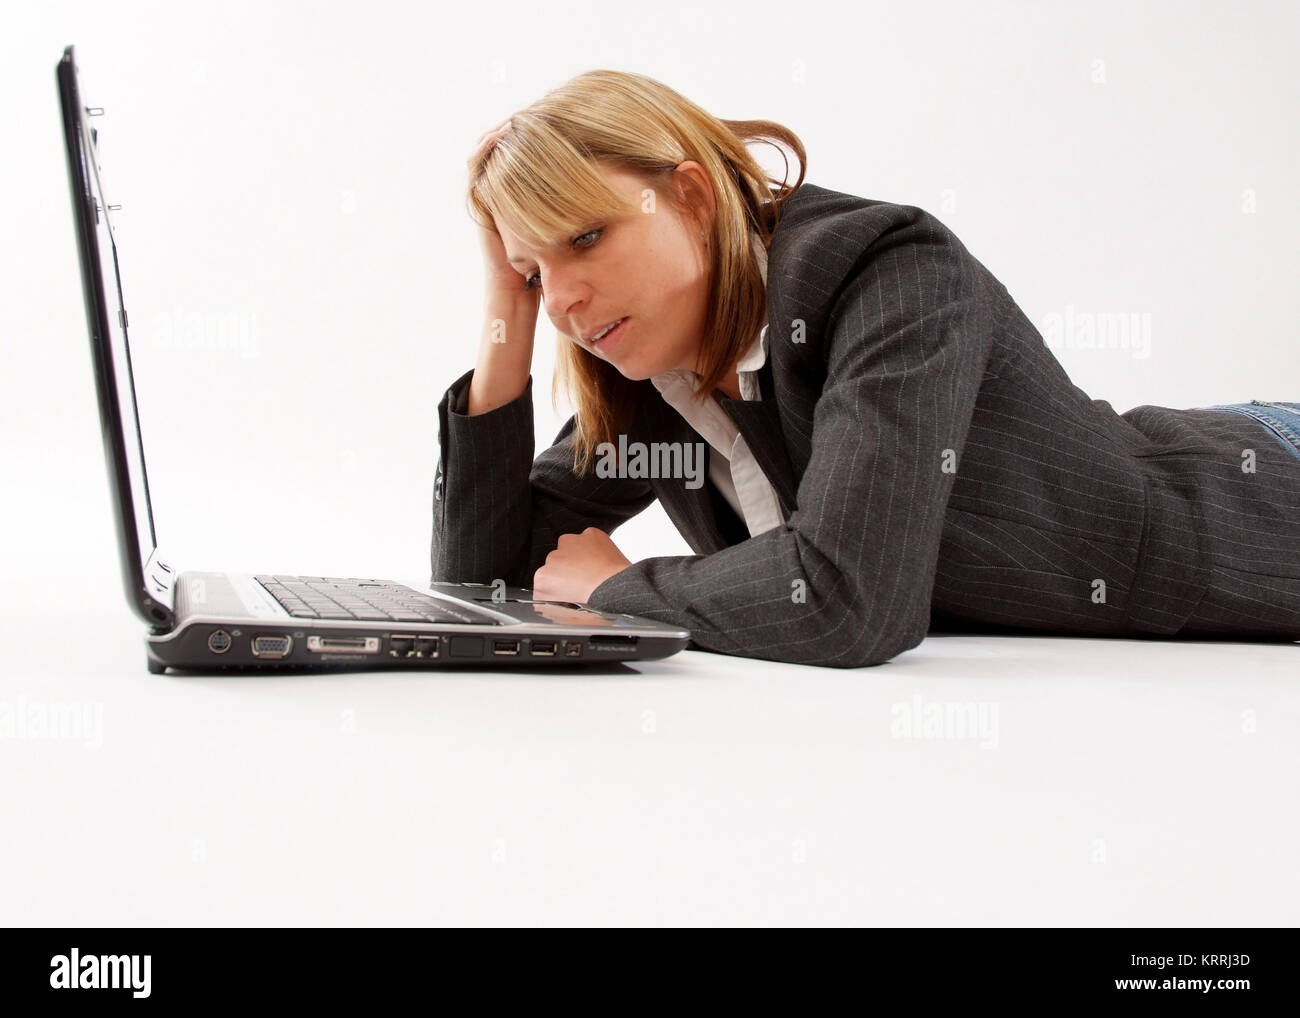 Geschaeftsfrau mit Laptop - business woman with laptop Stock Photo